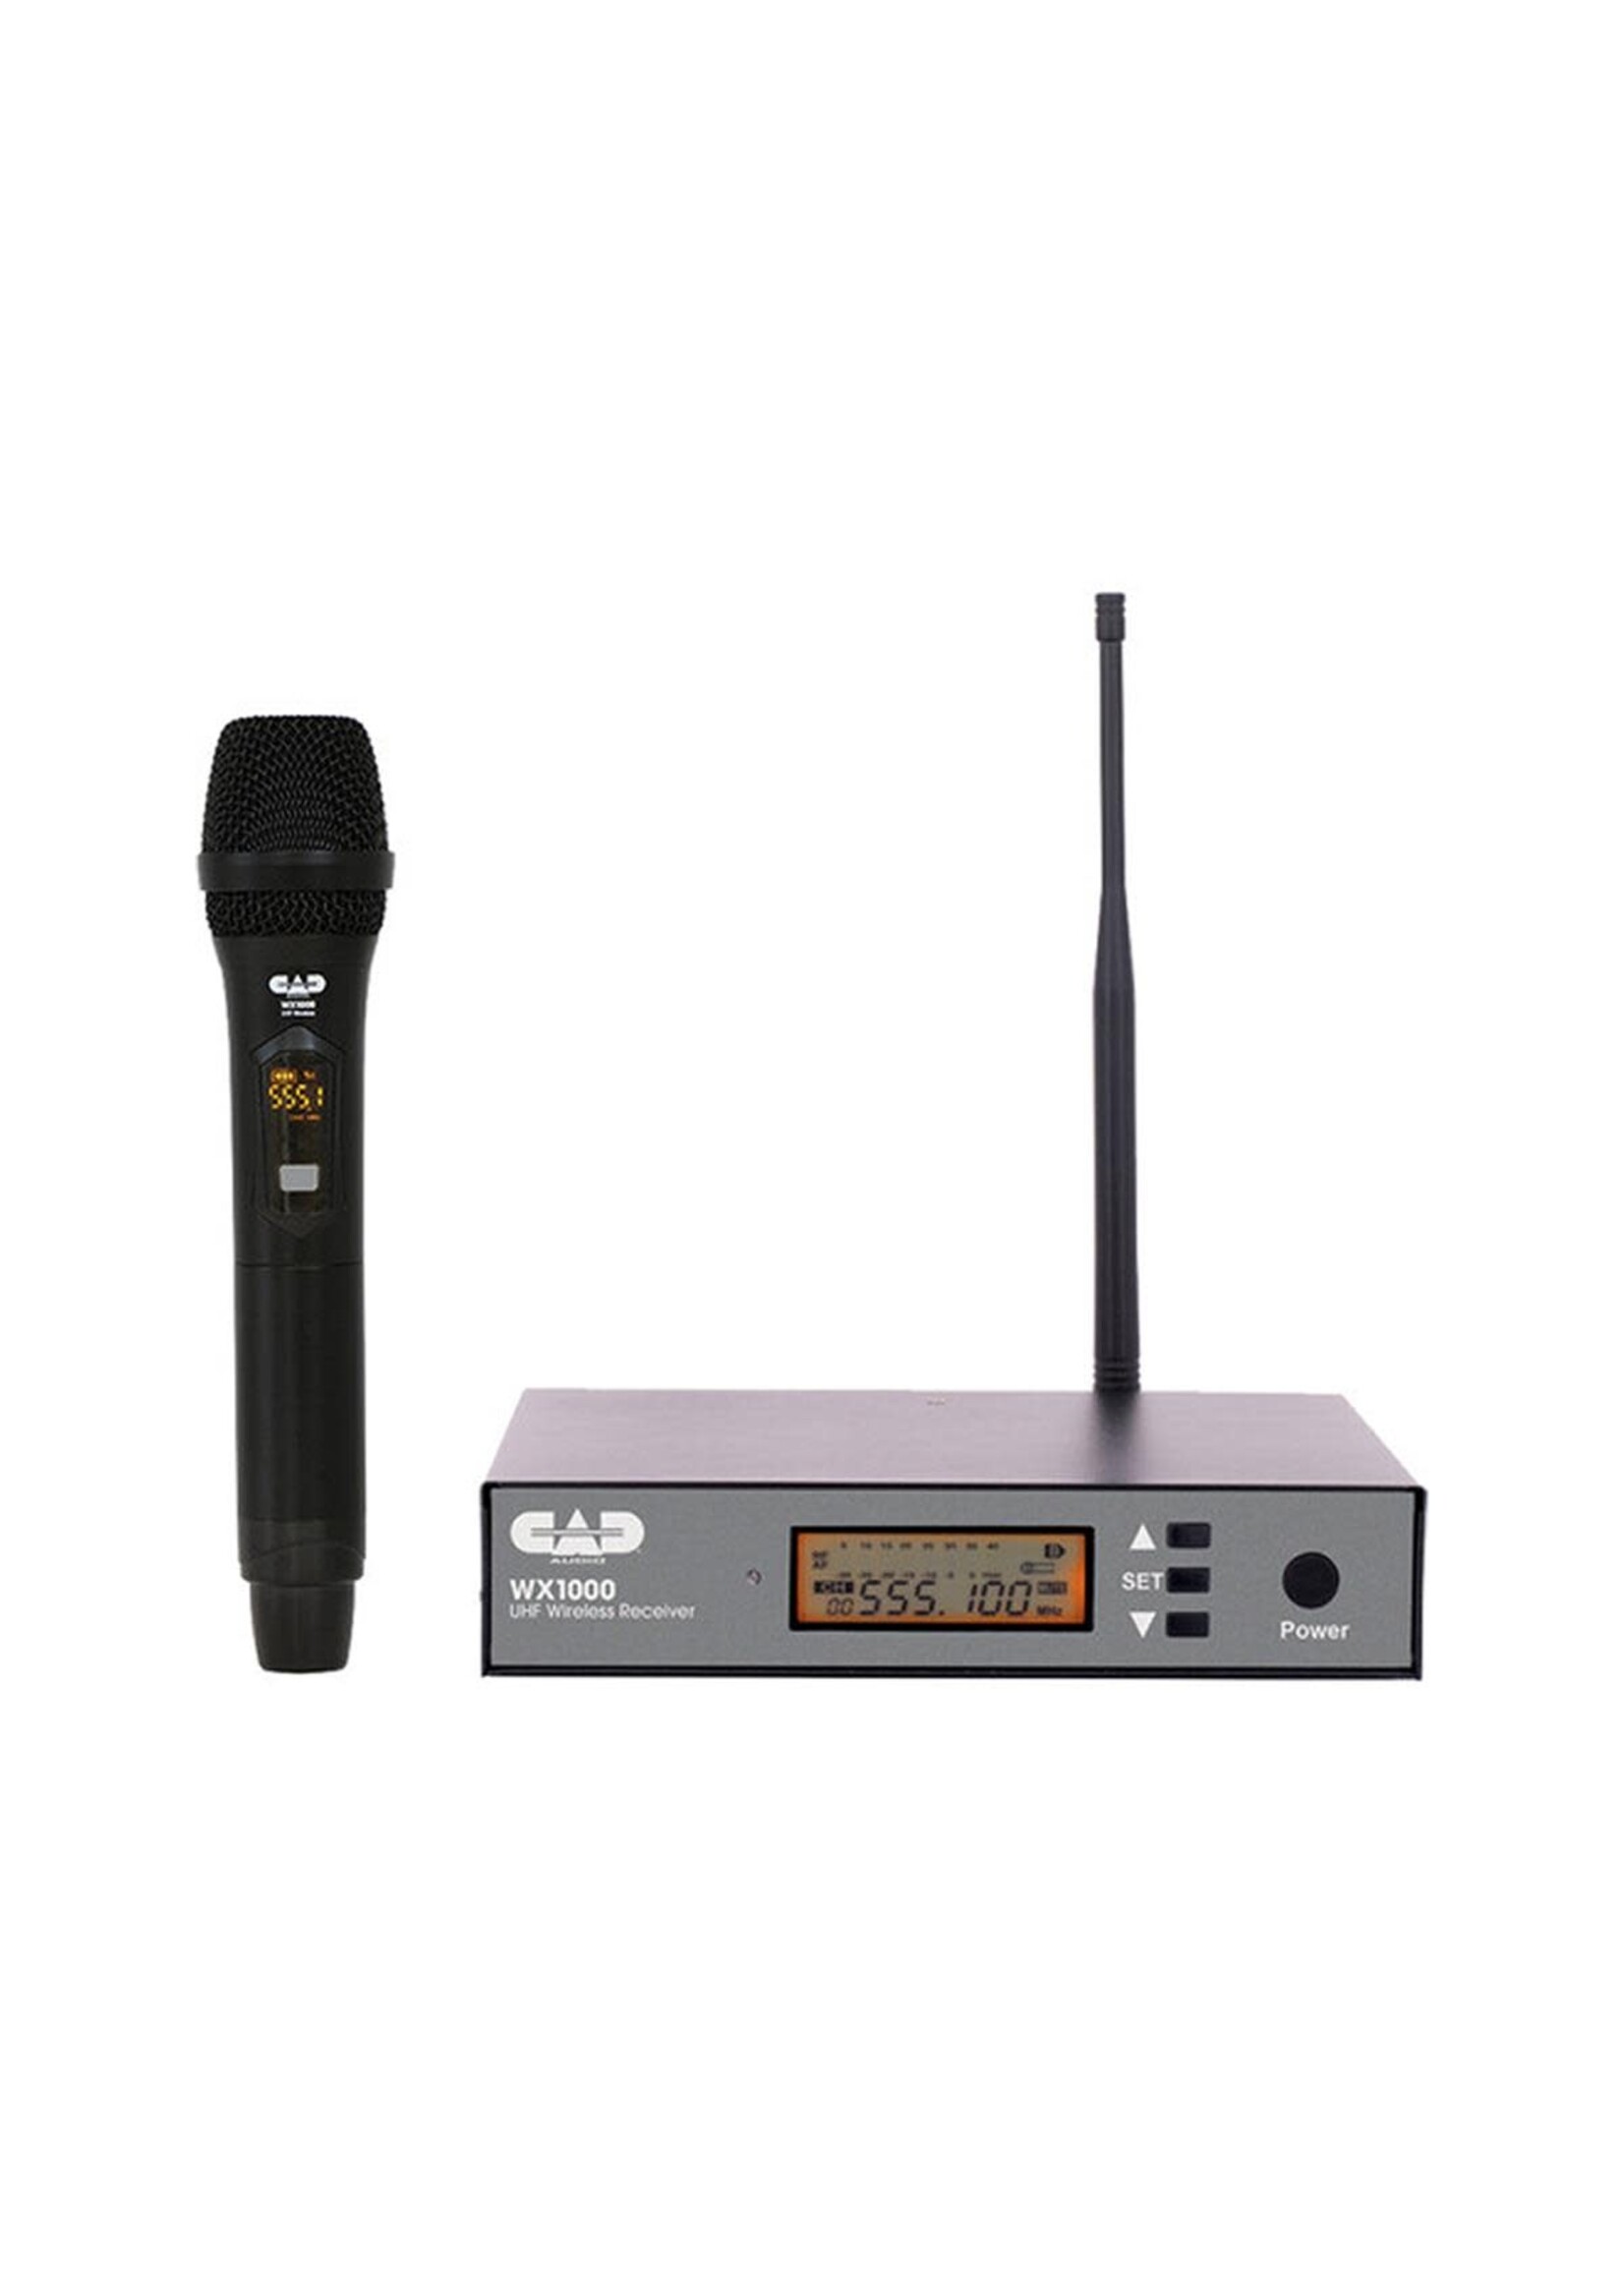 CAD CAD Audio 100-Channel UHF Wireless Handheld Mic System, 510-570 MHz